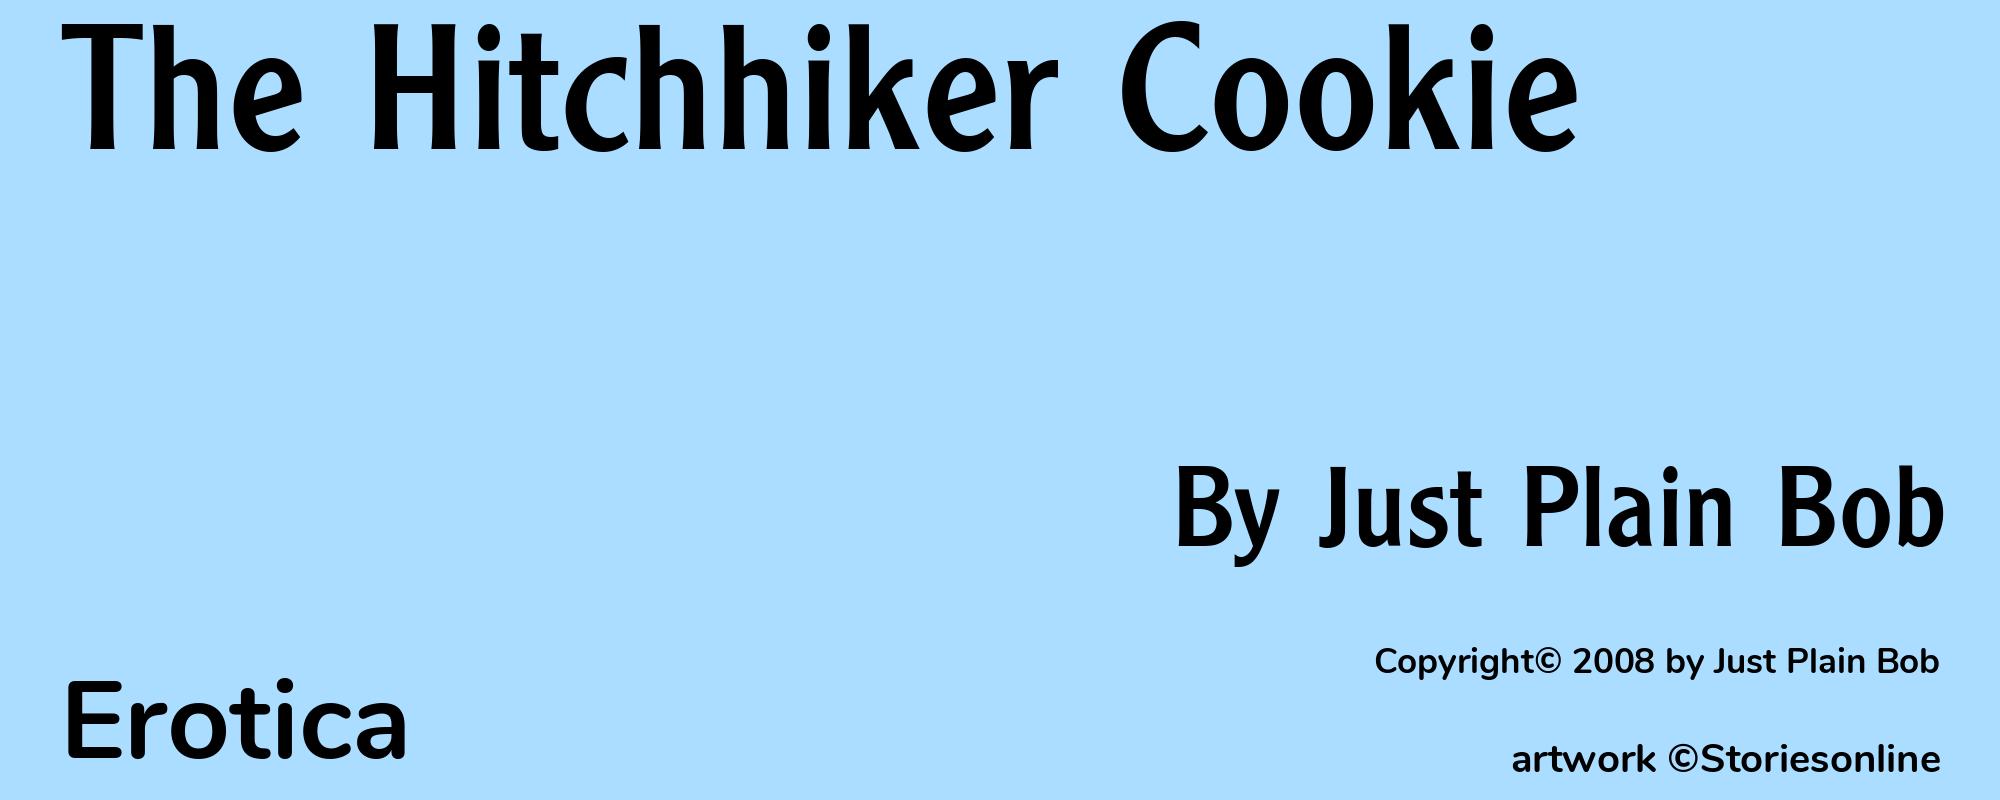 The Hitchhiker Cookie - Cover